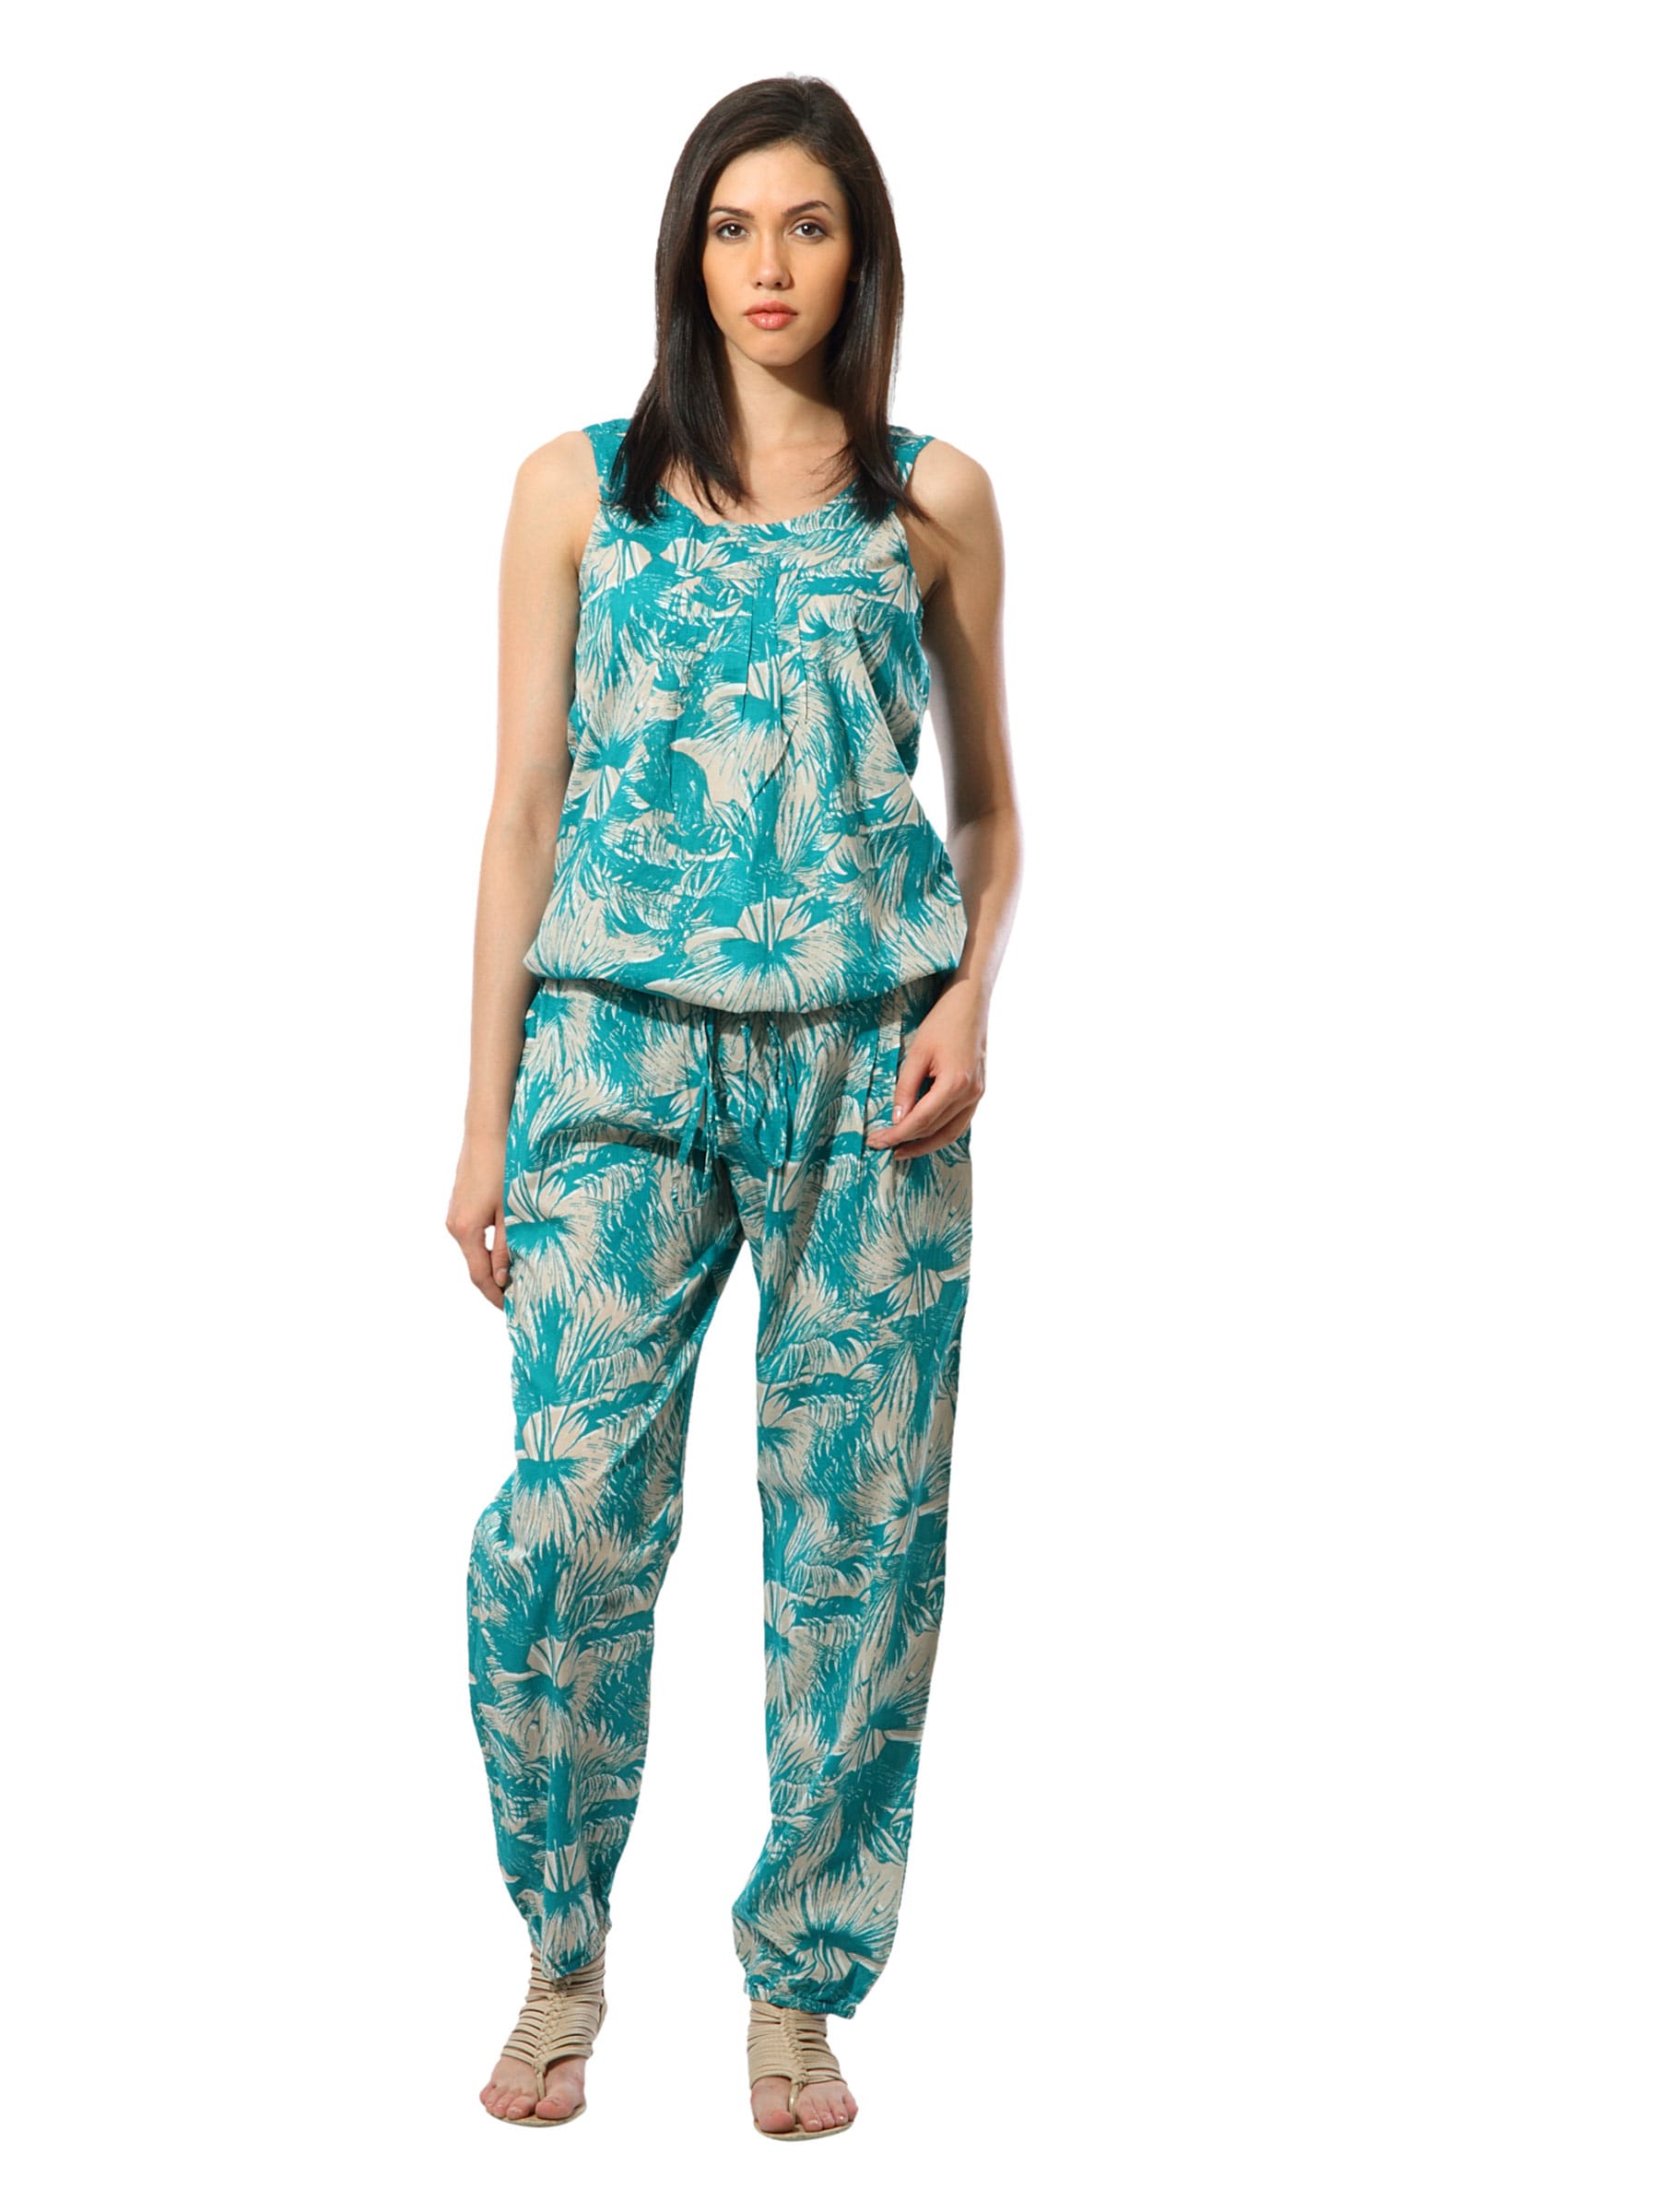 United Colors of Benetton Women Printed Teal Jumpsuit